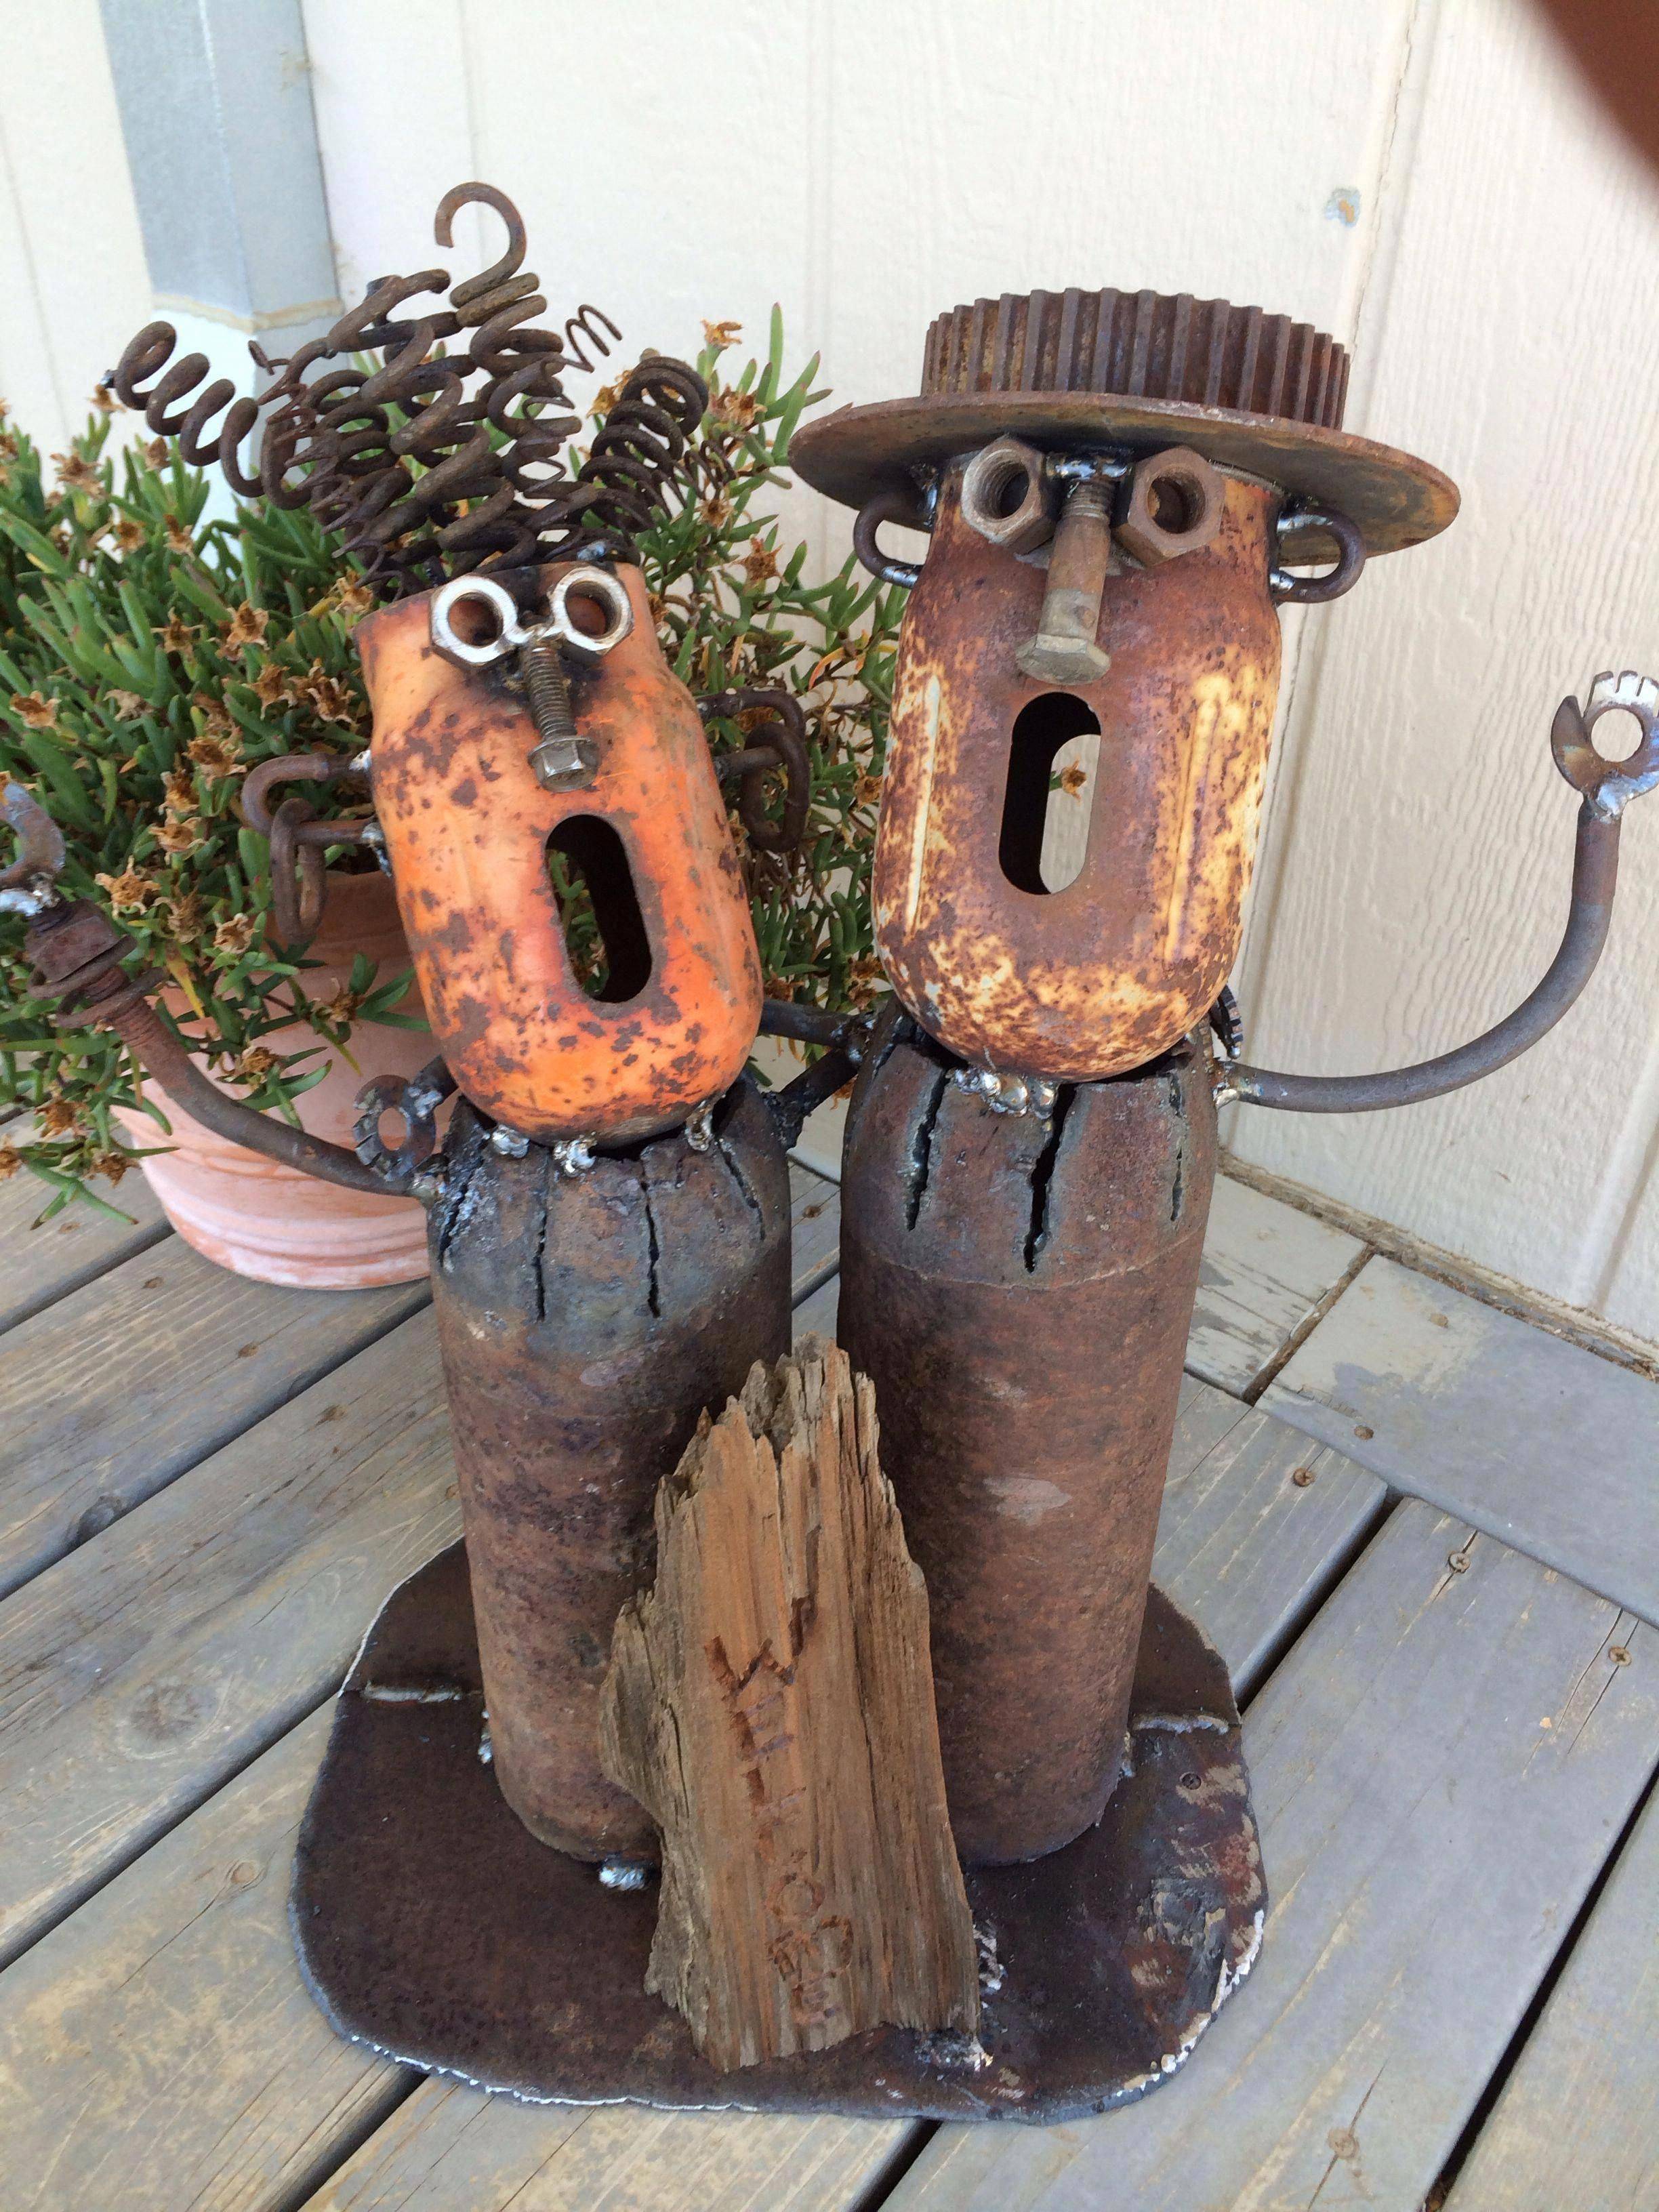 Amazing Diy Recycled Garden Art Projects Recycled Garden Art Garden